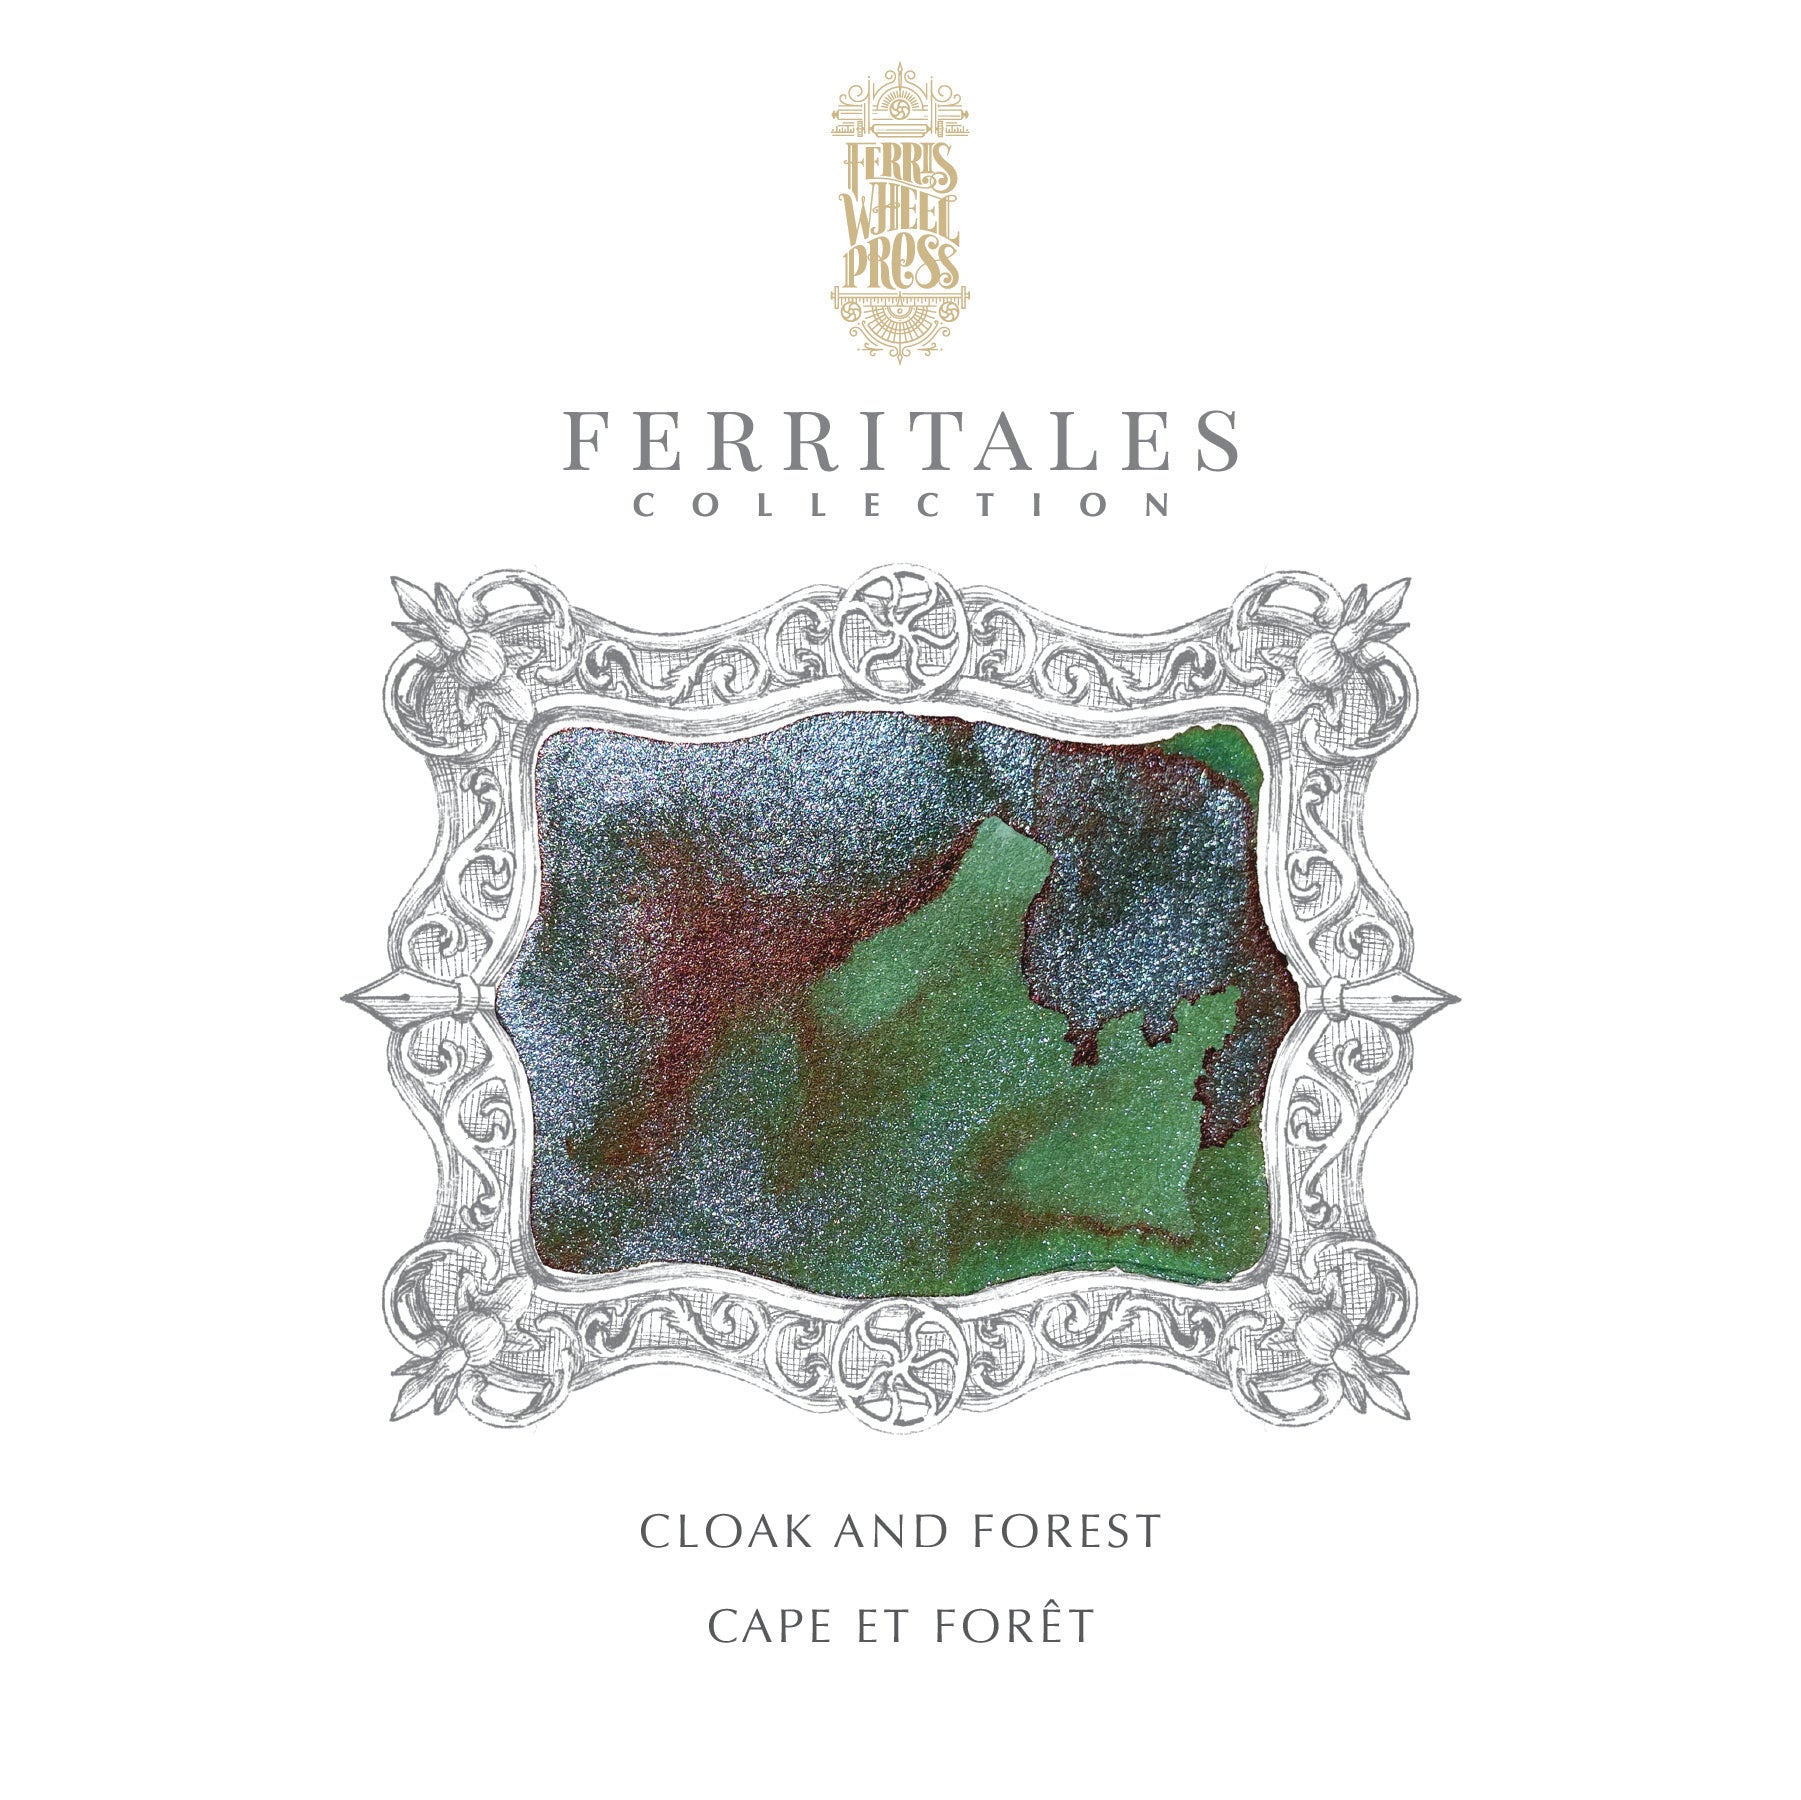 FerriTales™ Ferris Wheel Press | Once Upon A Time | Cloak and Forest 20ml